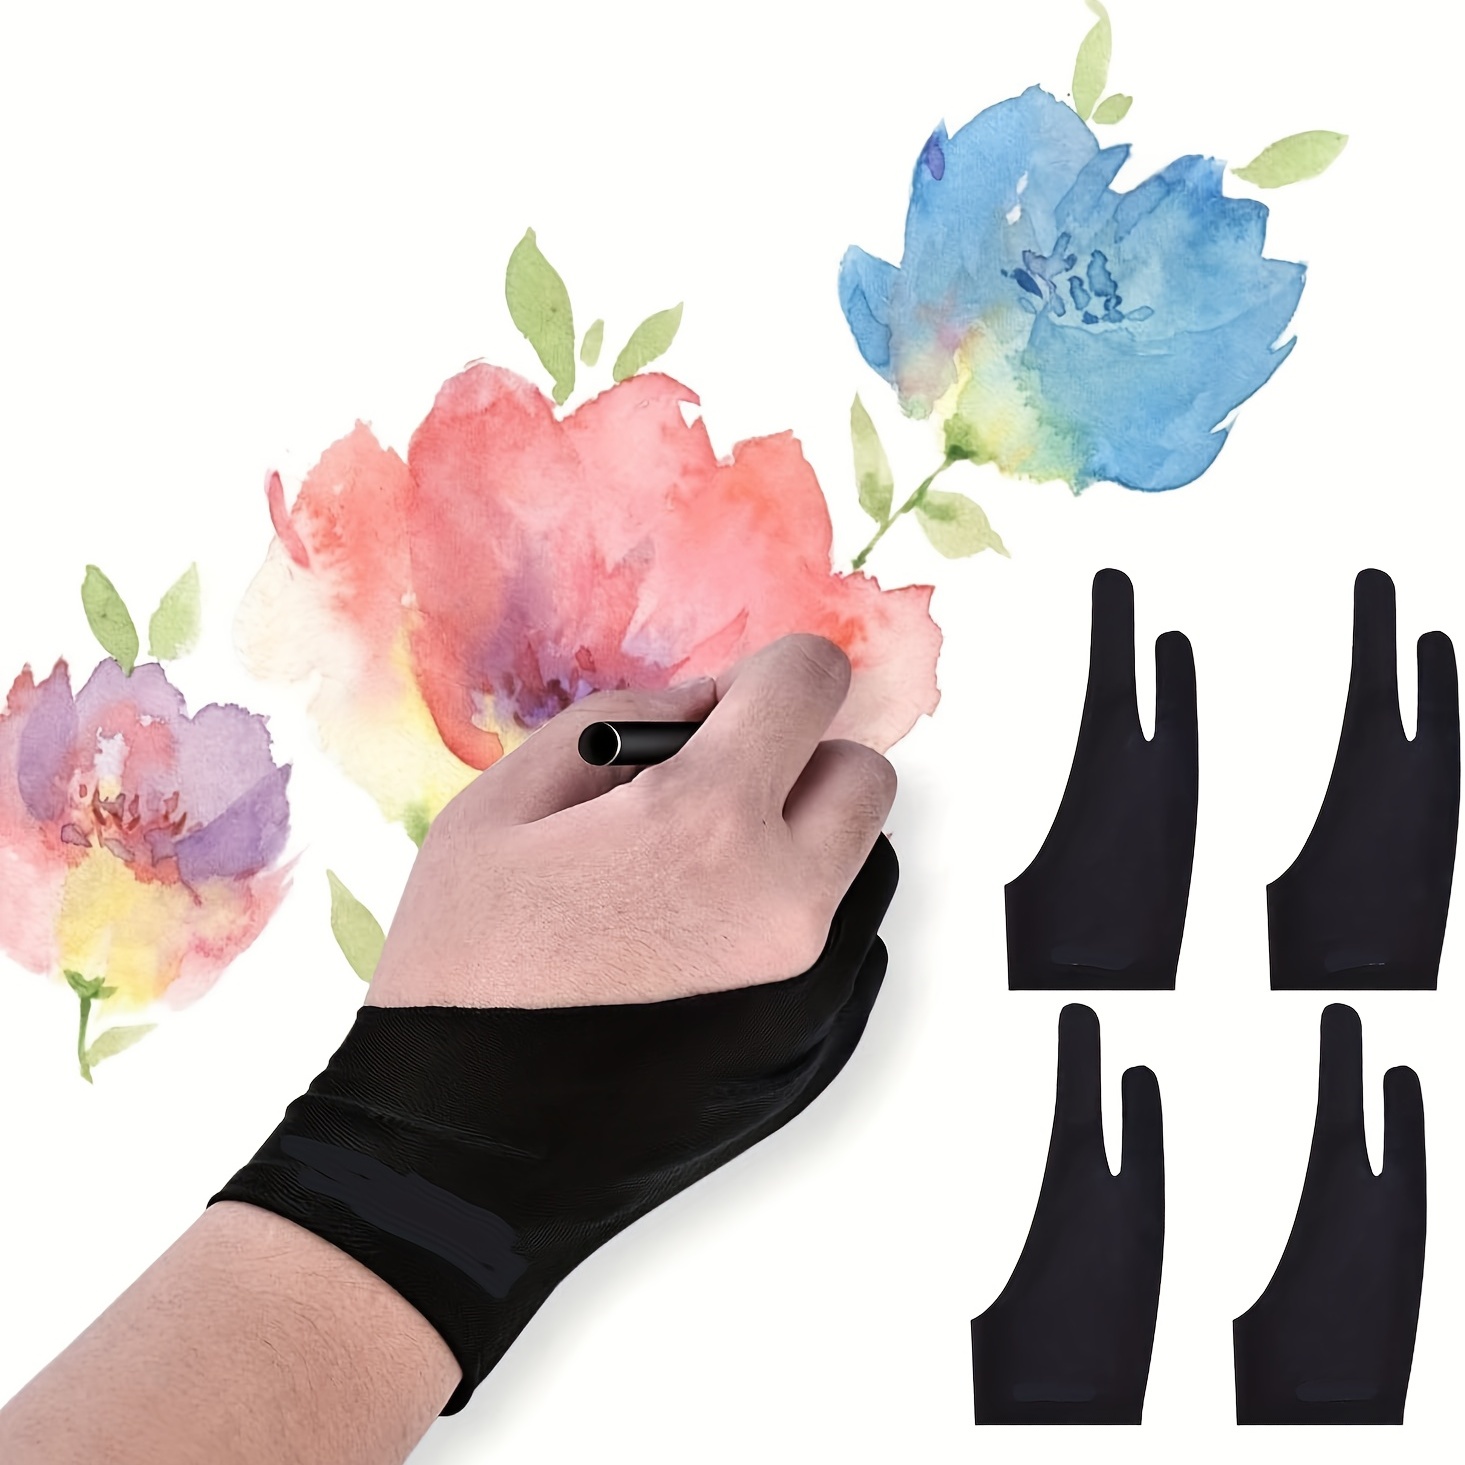 Huion Artist Glove for Drawing Tablet (1 Unit of Free size, Good for Right Hand